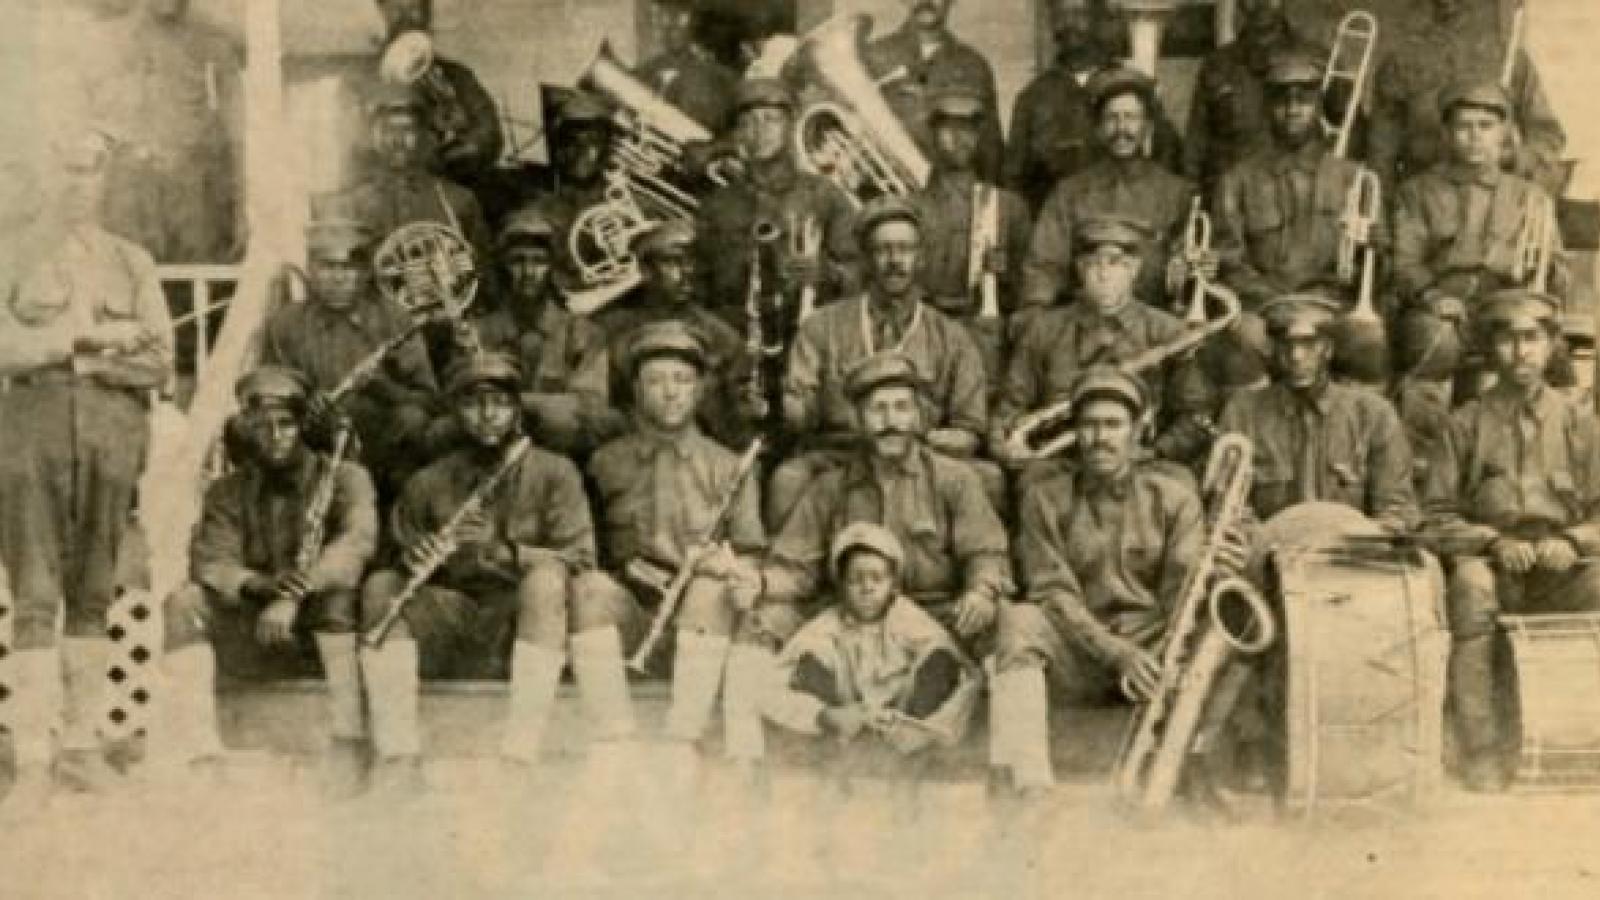 Members of the Second Regiment Marching Band.  Columbus, 1910